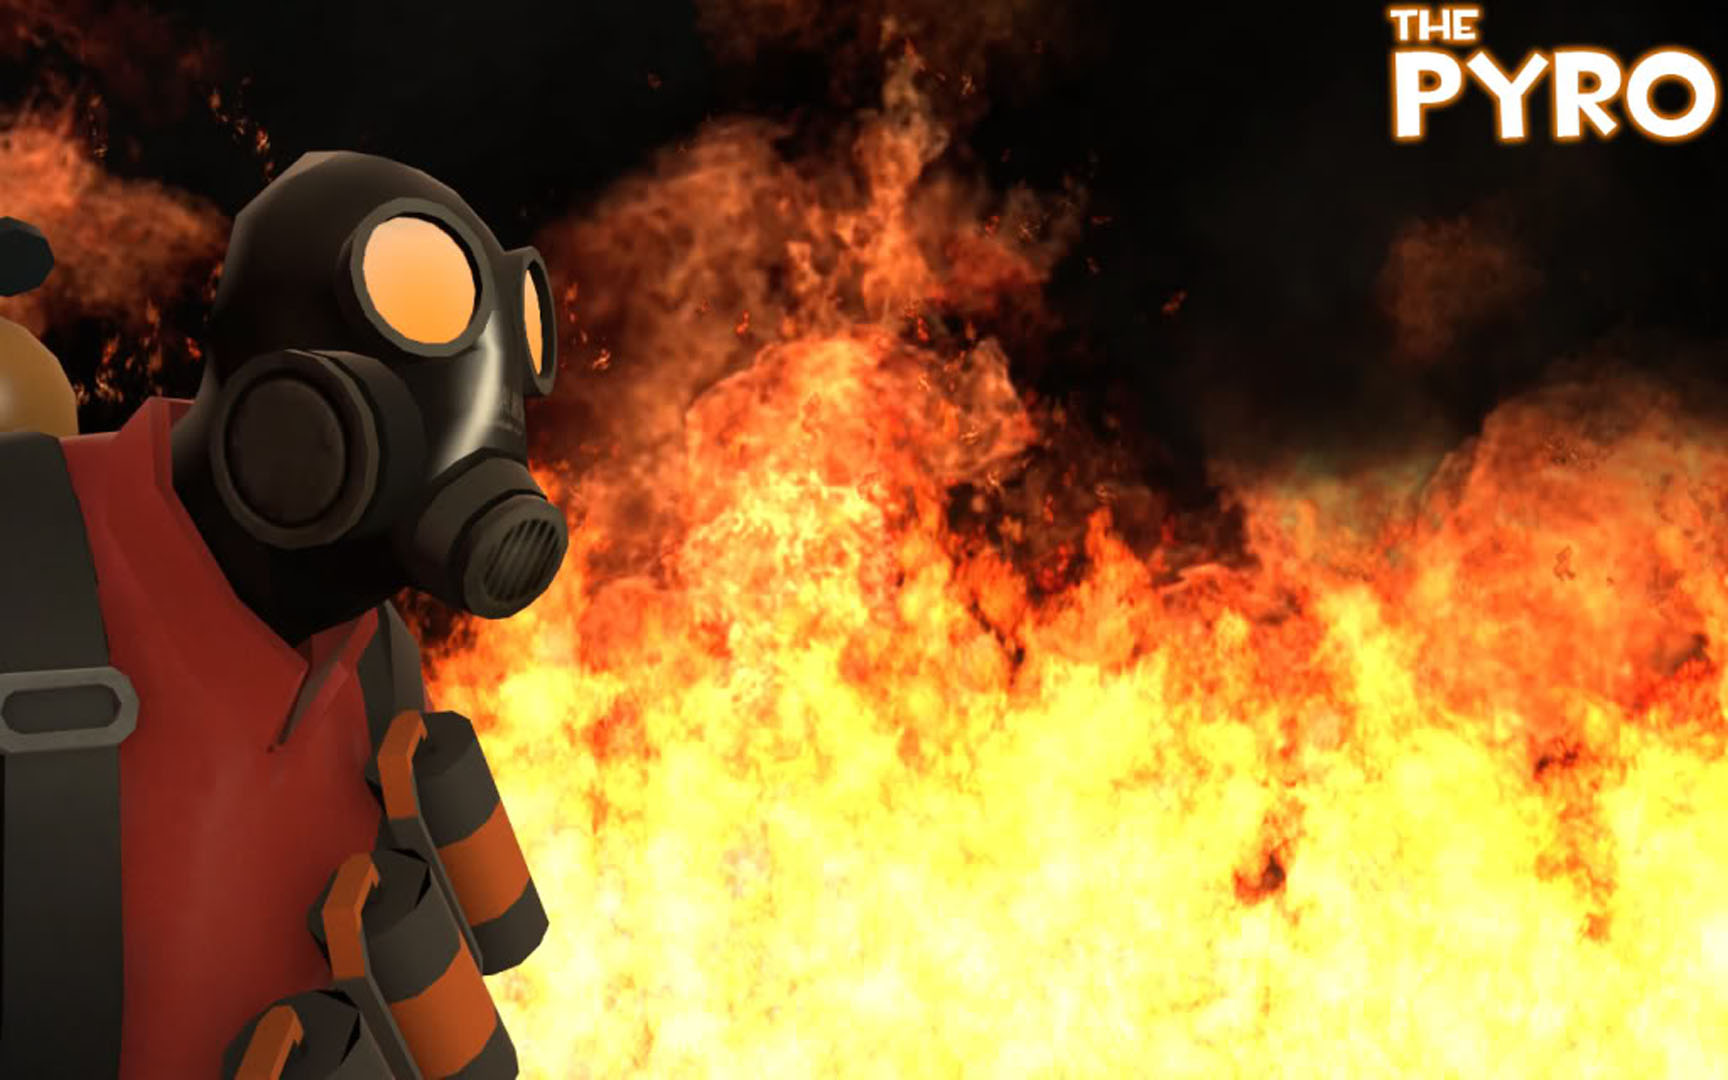 Wallpaper Image Featuring Team Fortress Pyro Fire